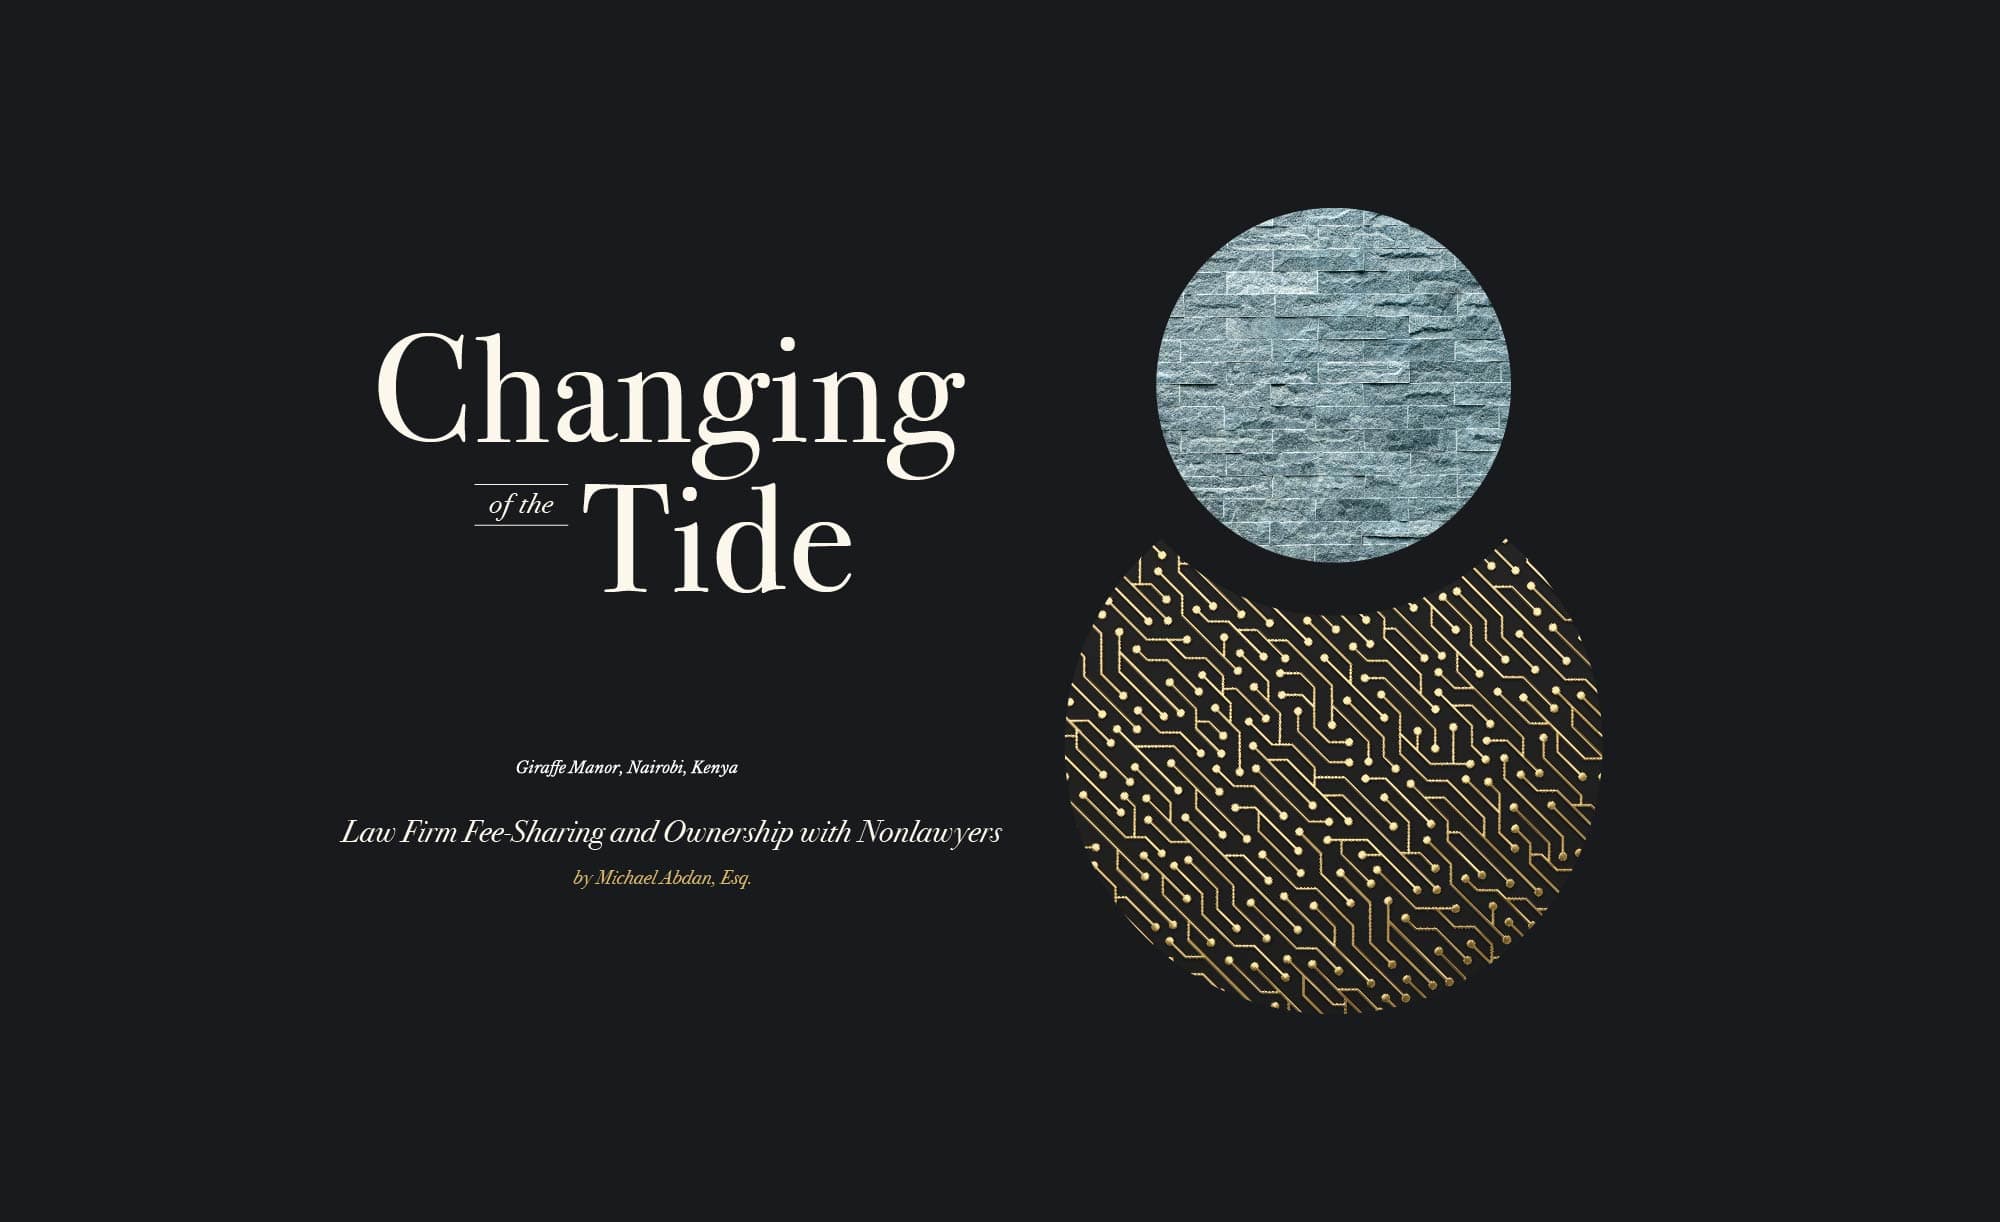 Changing of the Tide by Michael Abdan Esq.